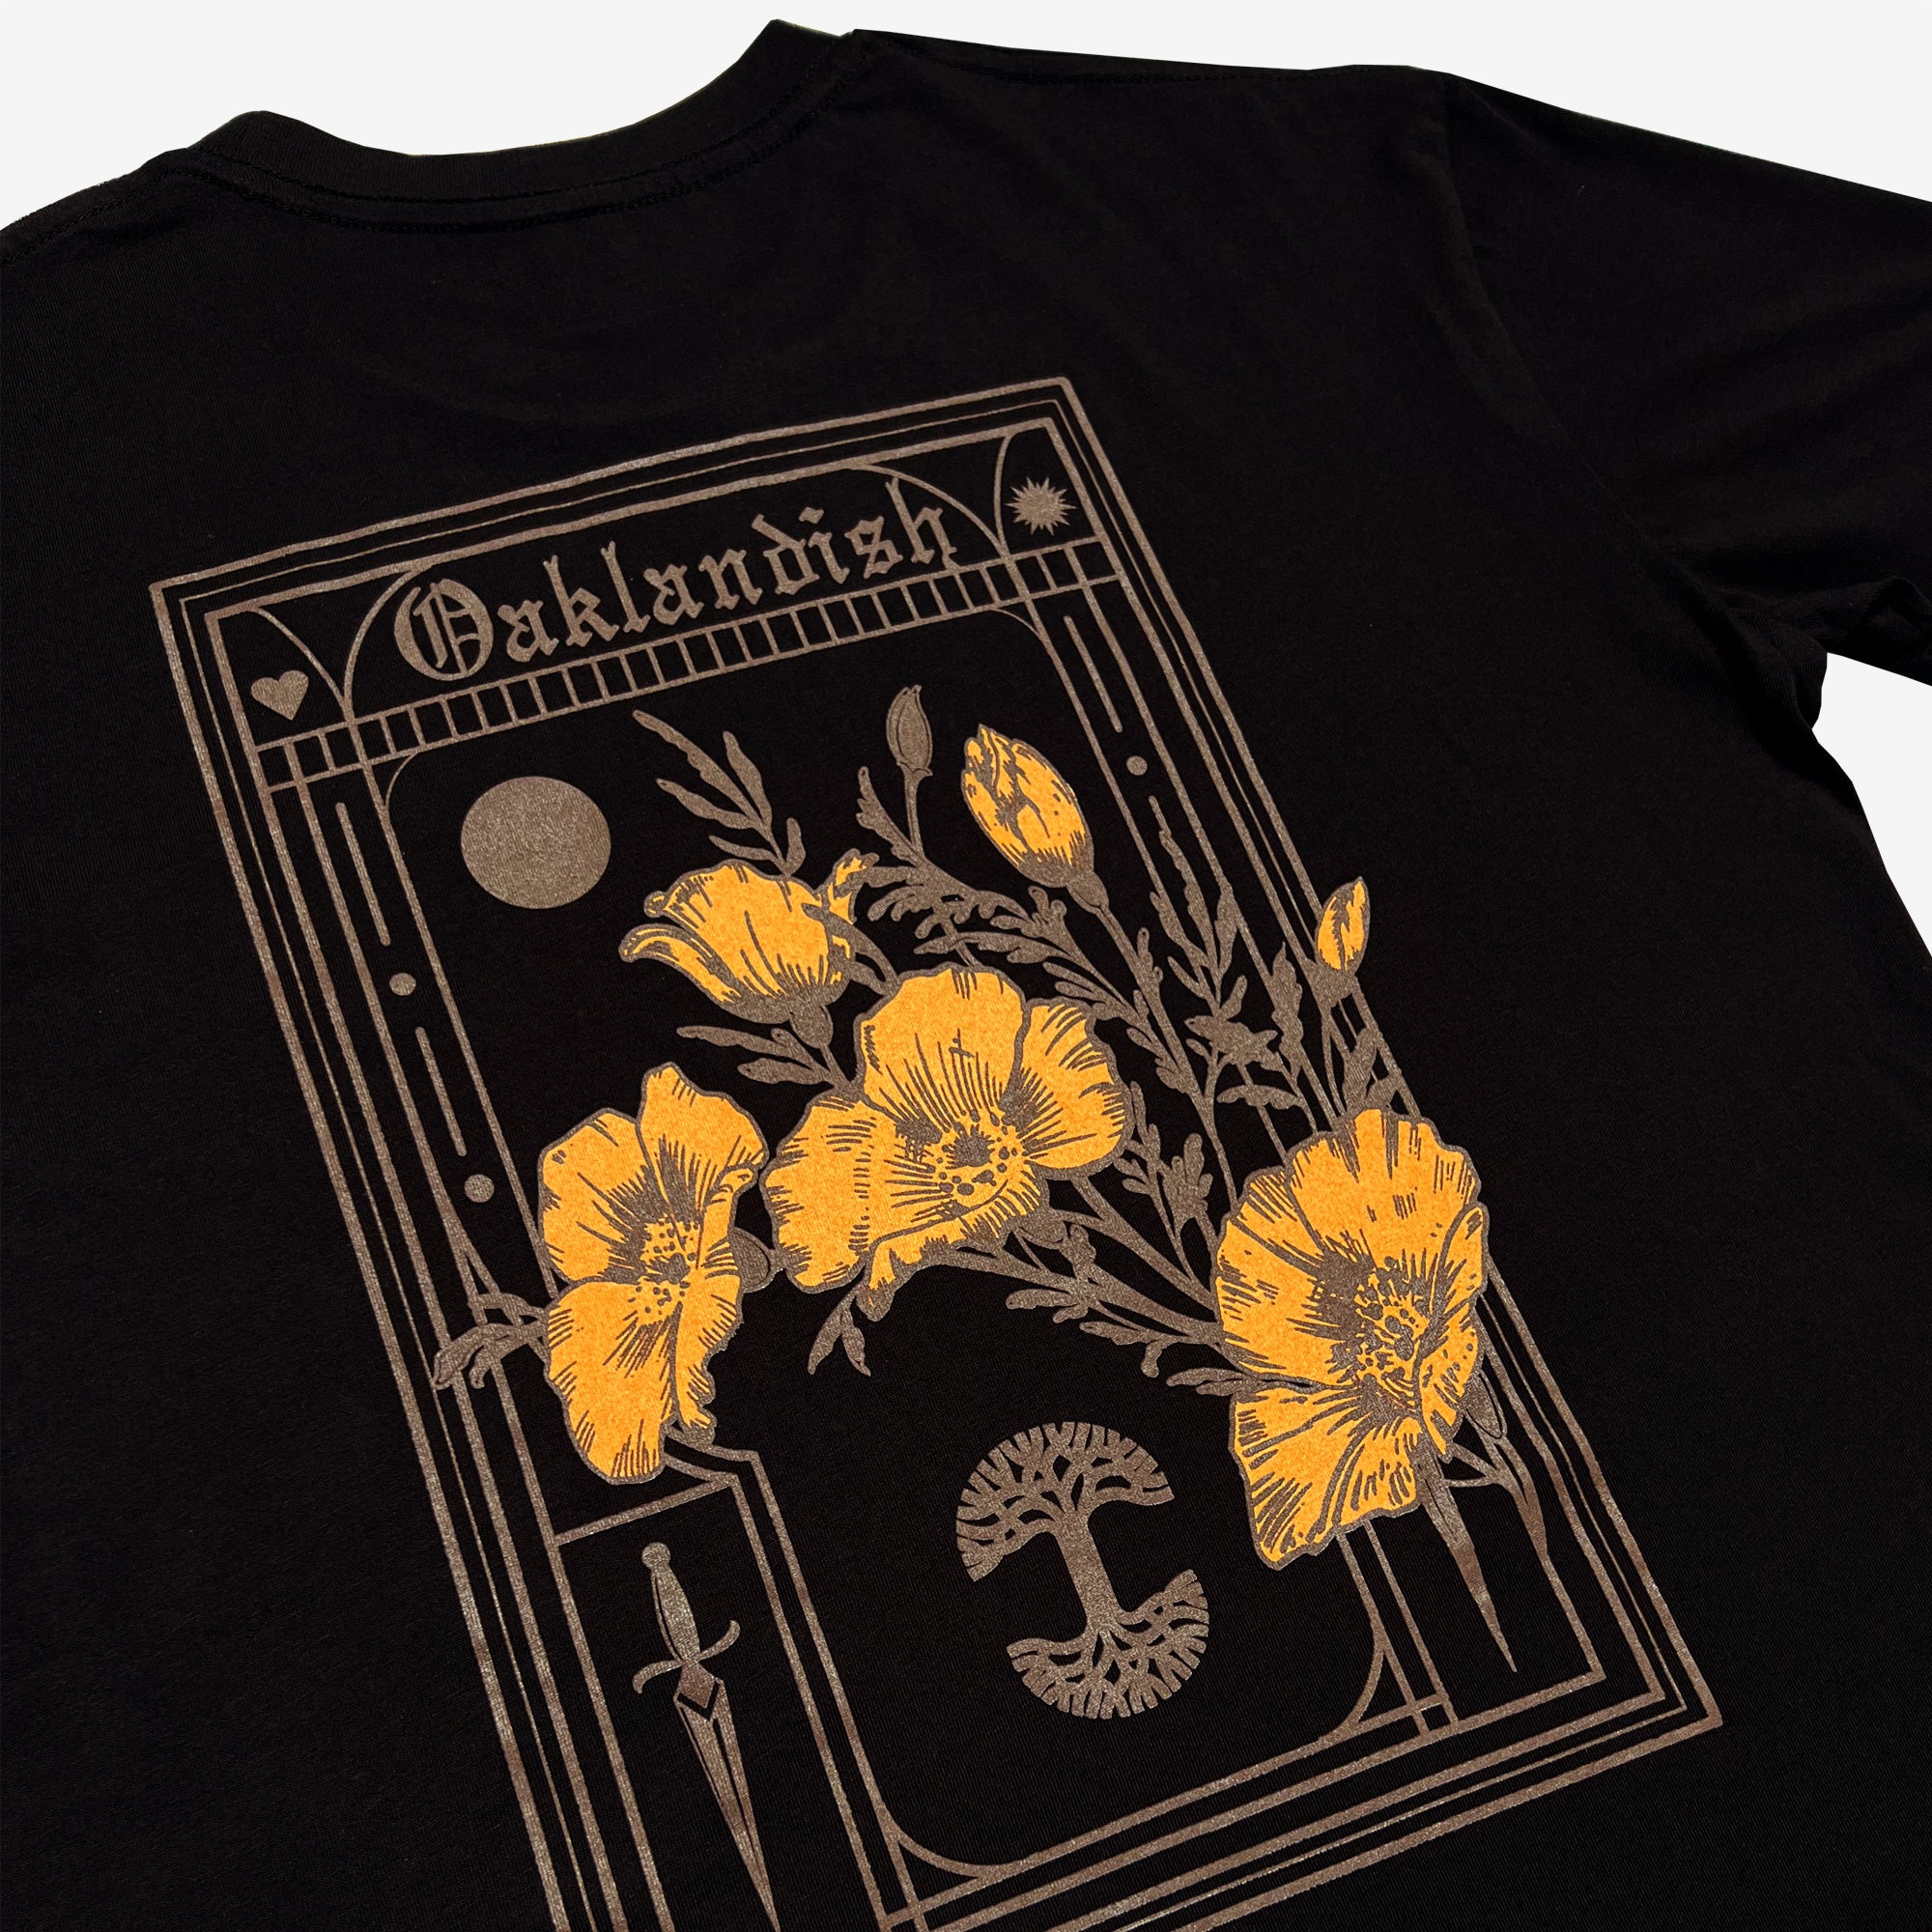 Close-up of the backside of a black cotton t-shirt with California poppies, an Oaklandish wordmark, and a tree logo.